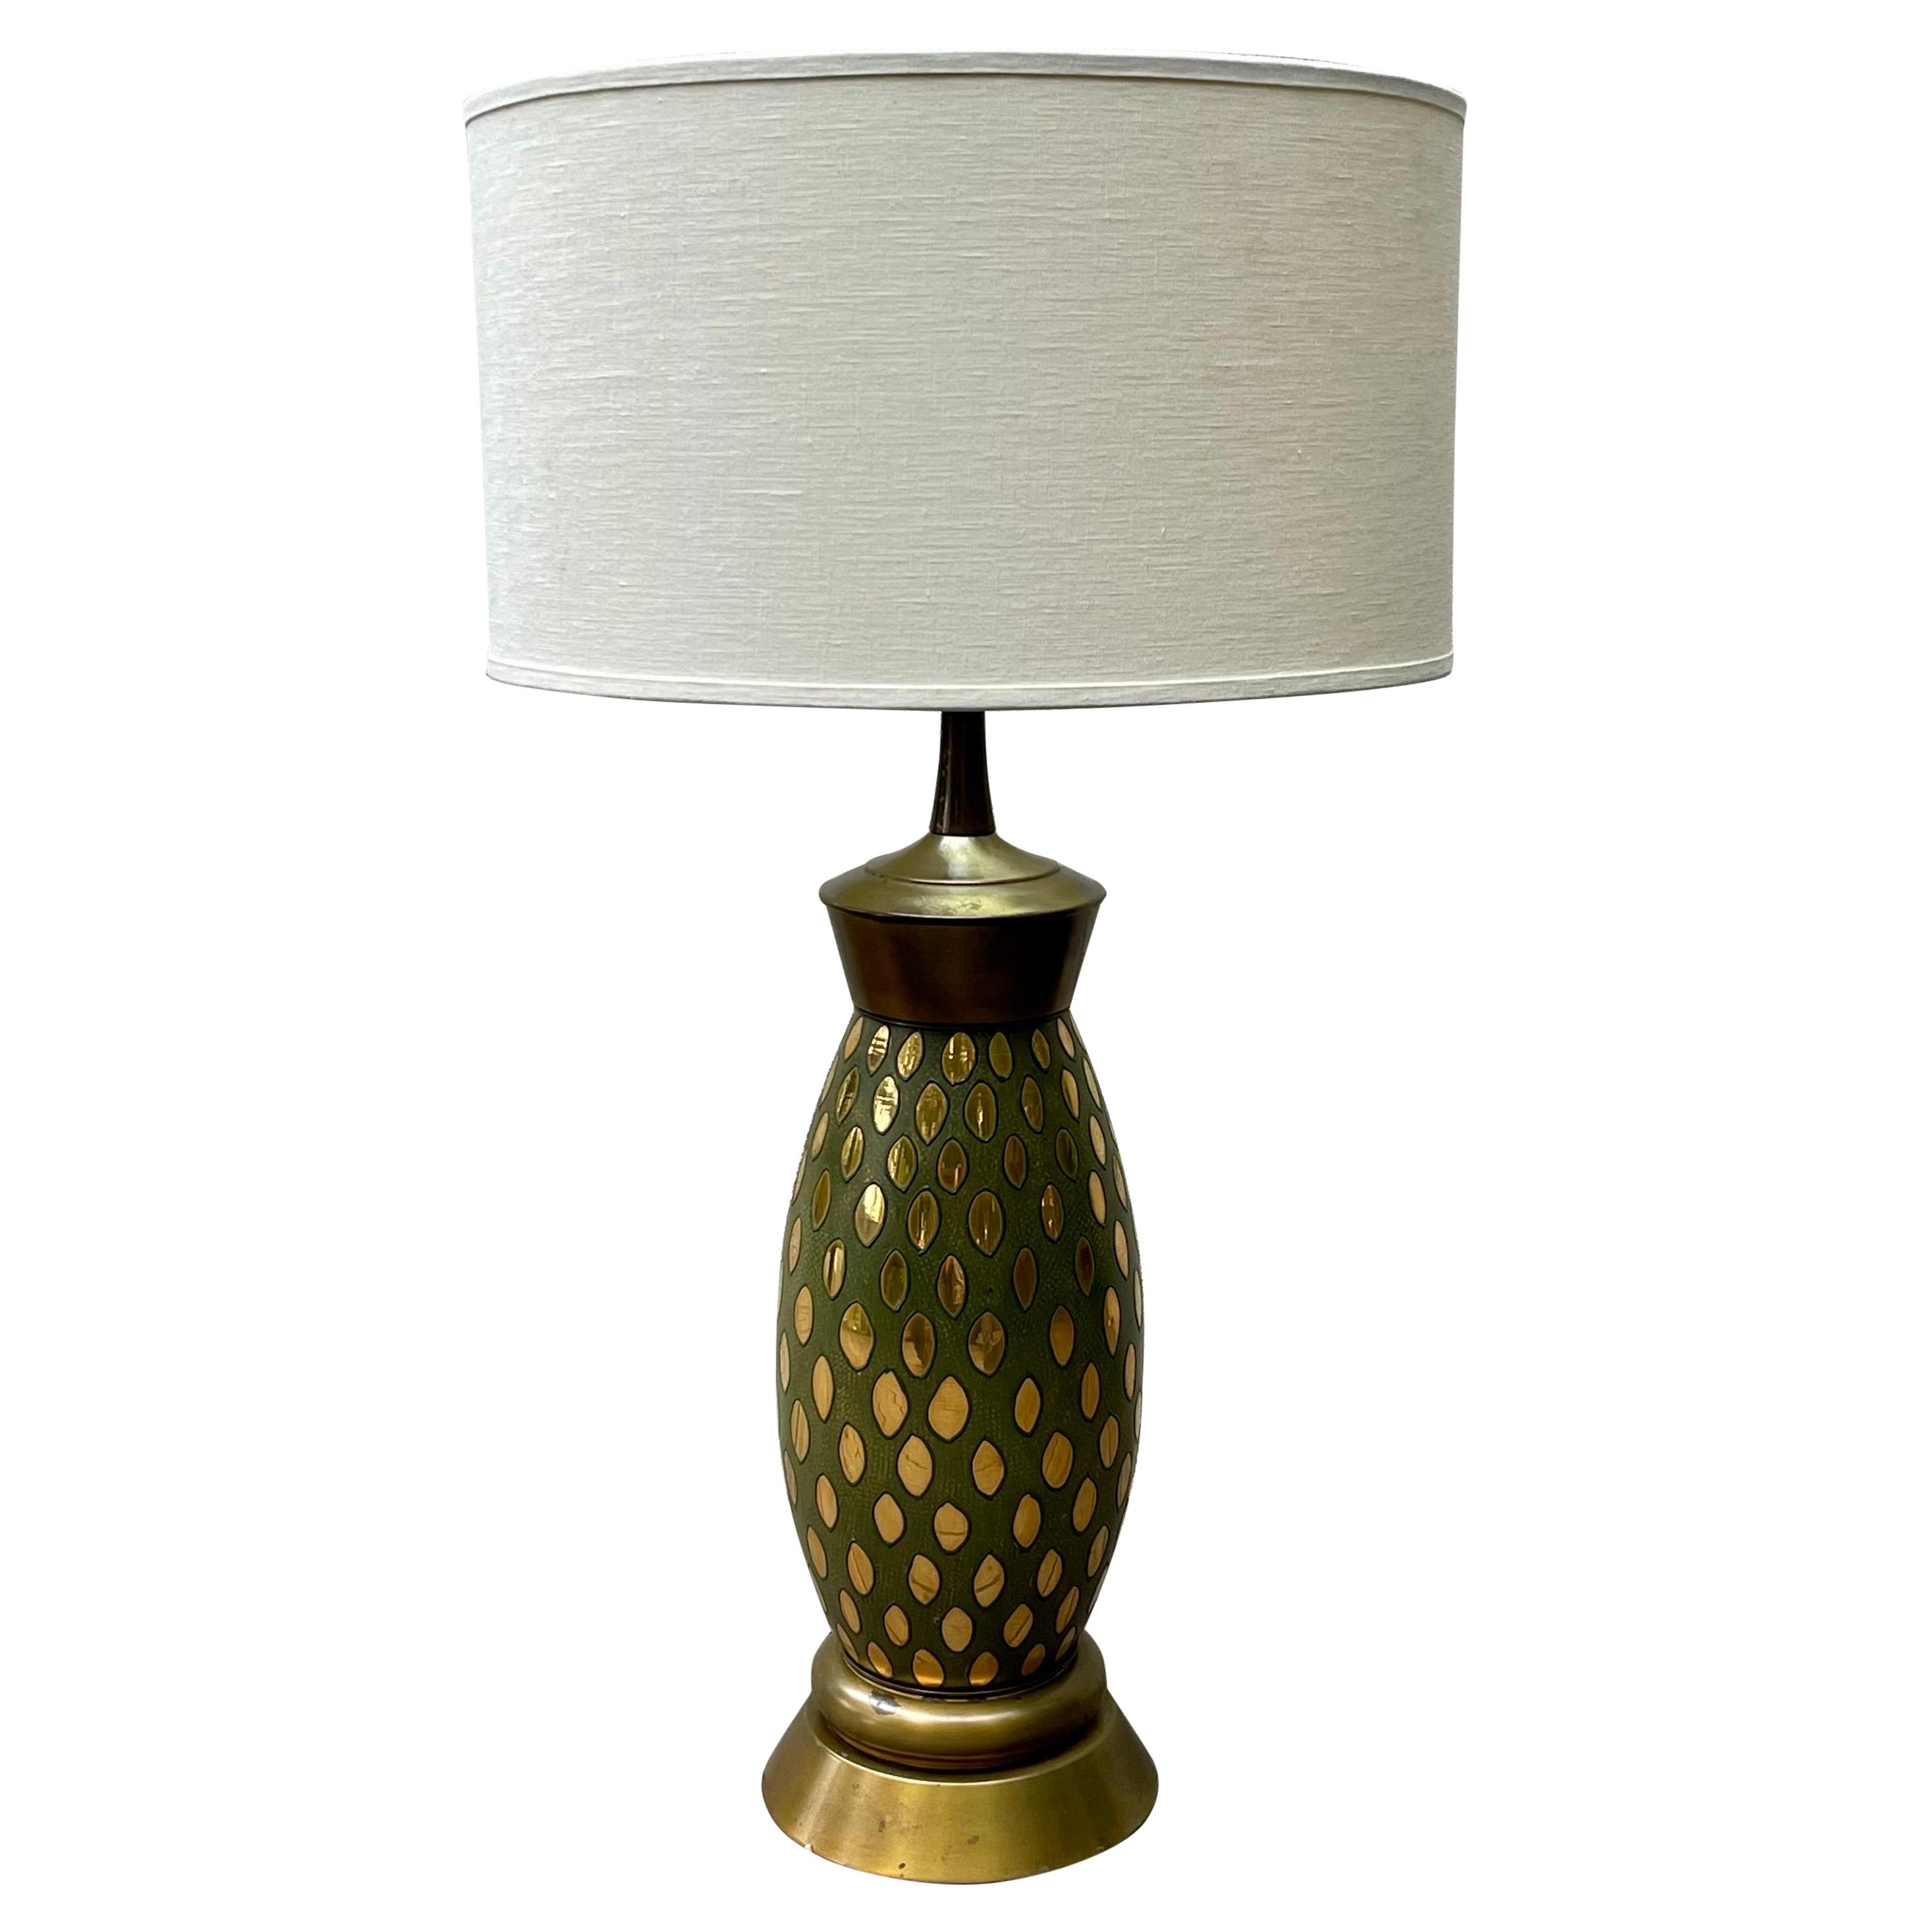 Mid-Century Modern Italian Art Glass Table Lamp, Vibrant Green with Gold Pattern For Sale